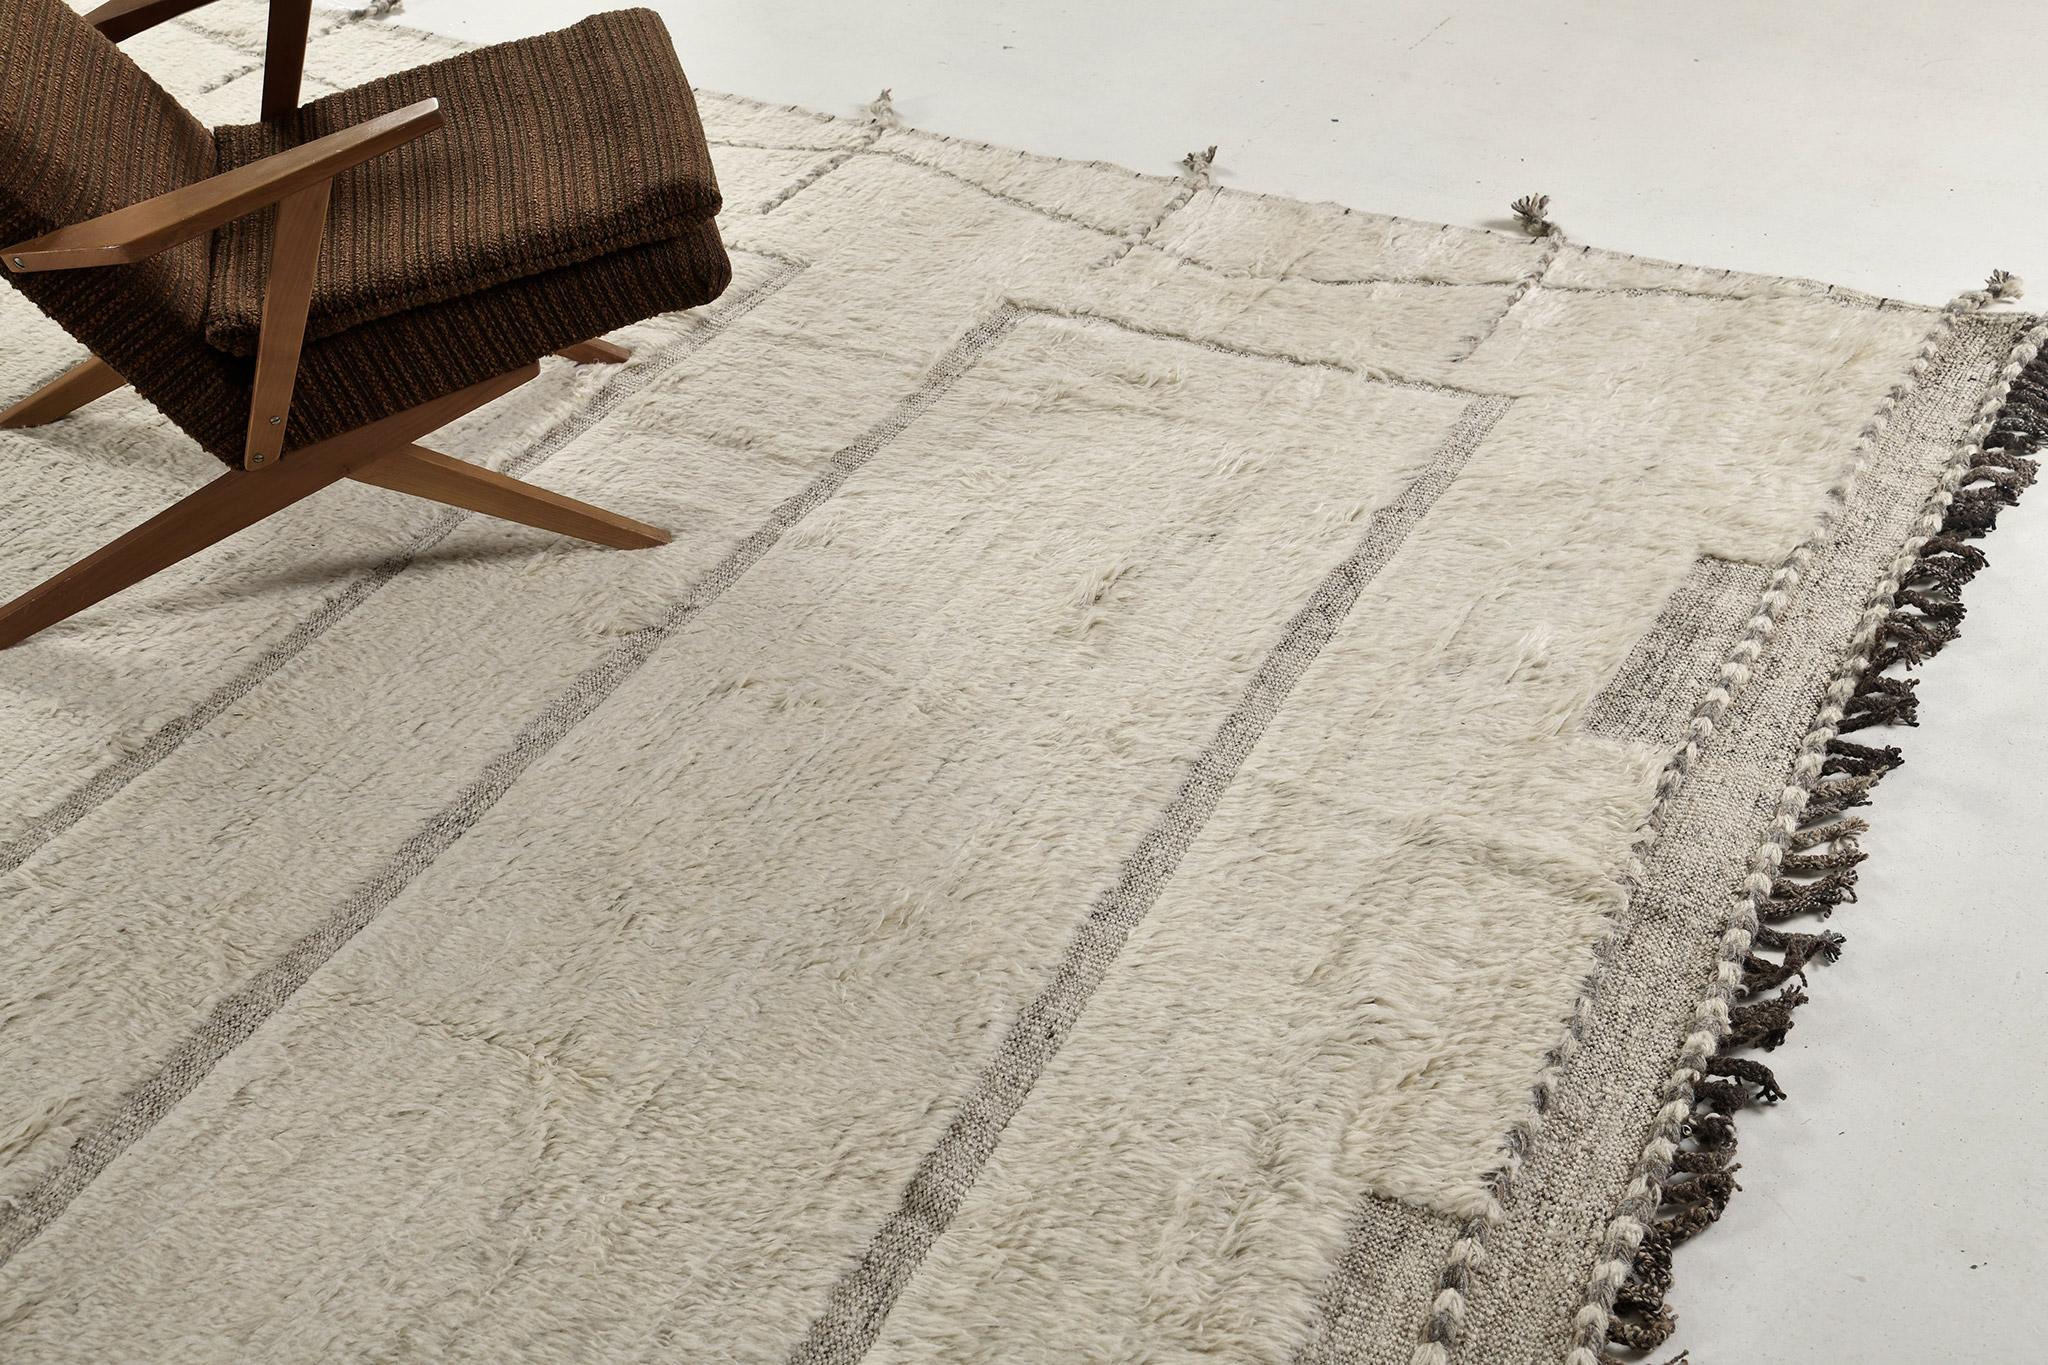 Cierzo is a signature collection of California. Its handwoven luxurious wool rug, made of remarkable and straightforward design and neutral tones. Haute Bohemian collection designed in Los Angeles named for the winds knitting together seasons,